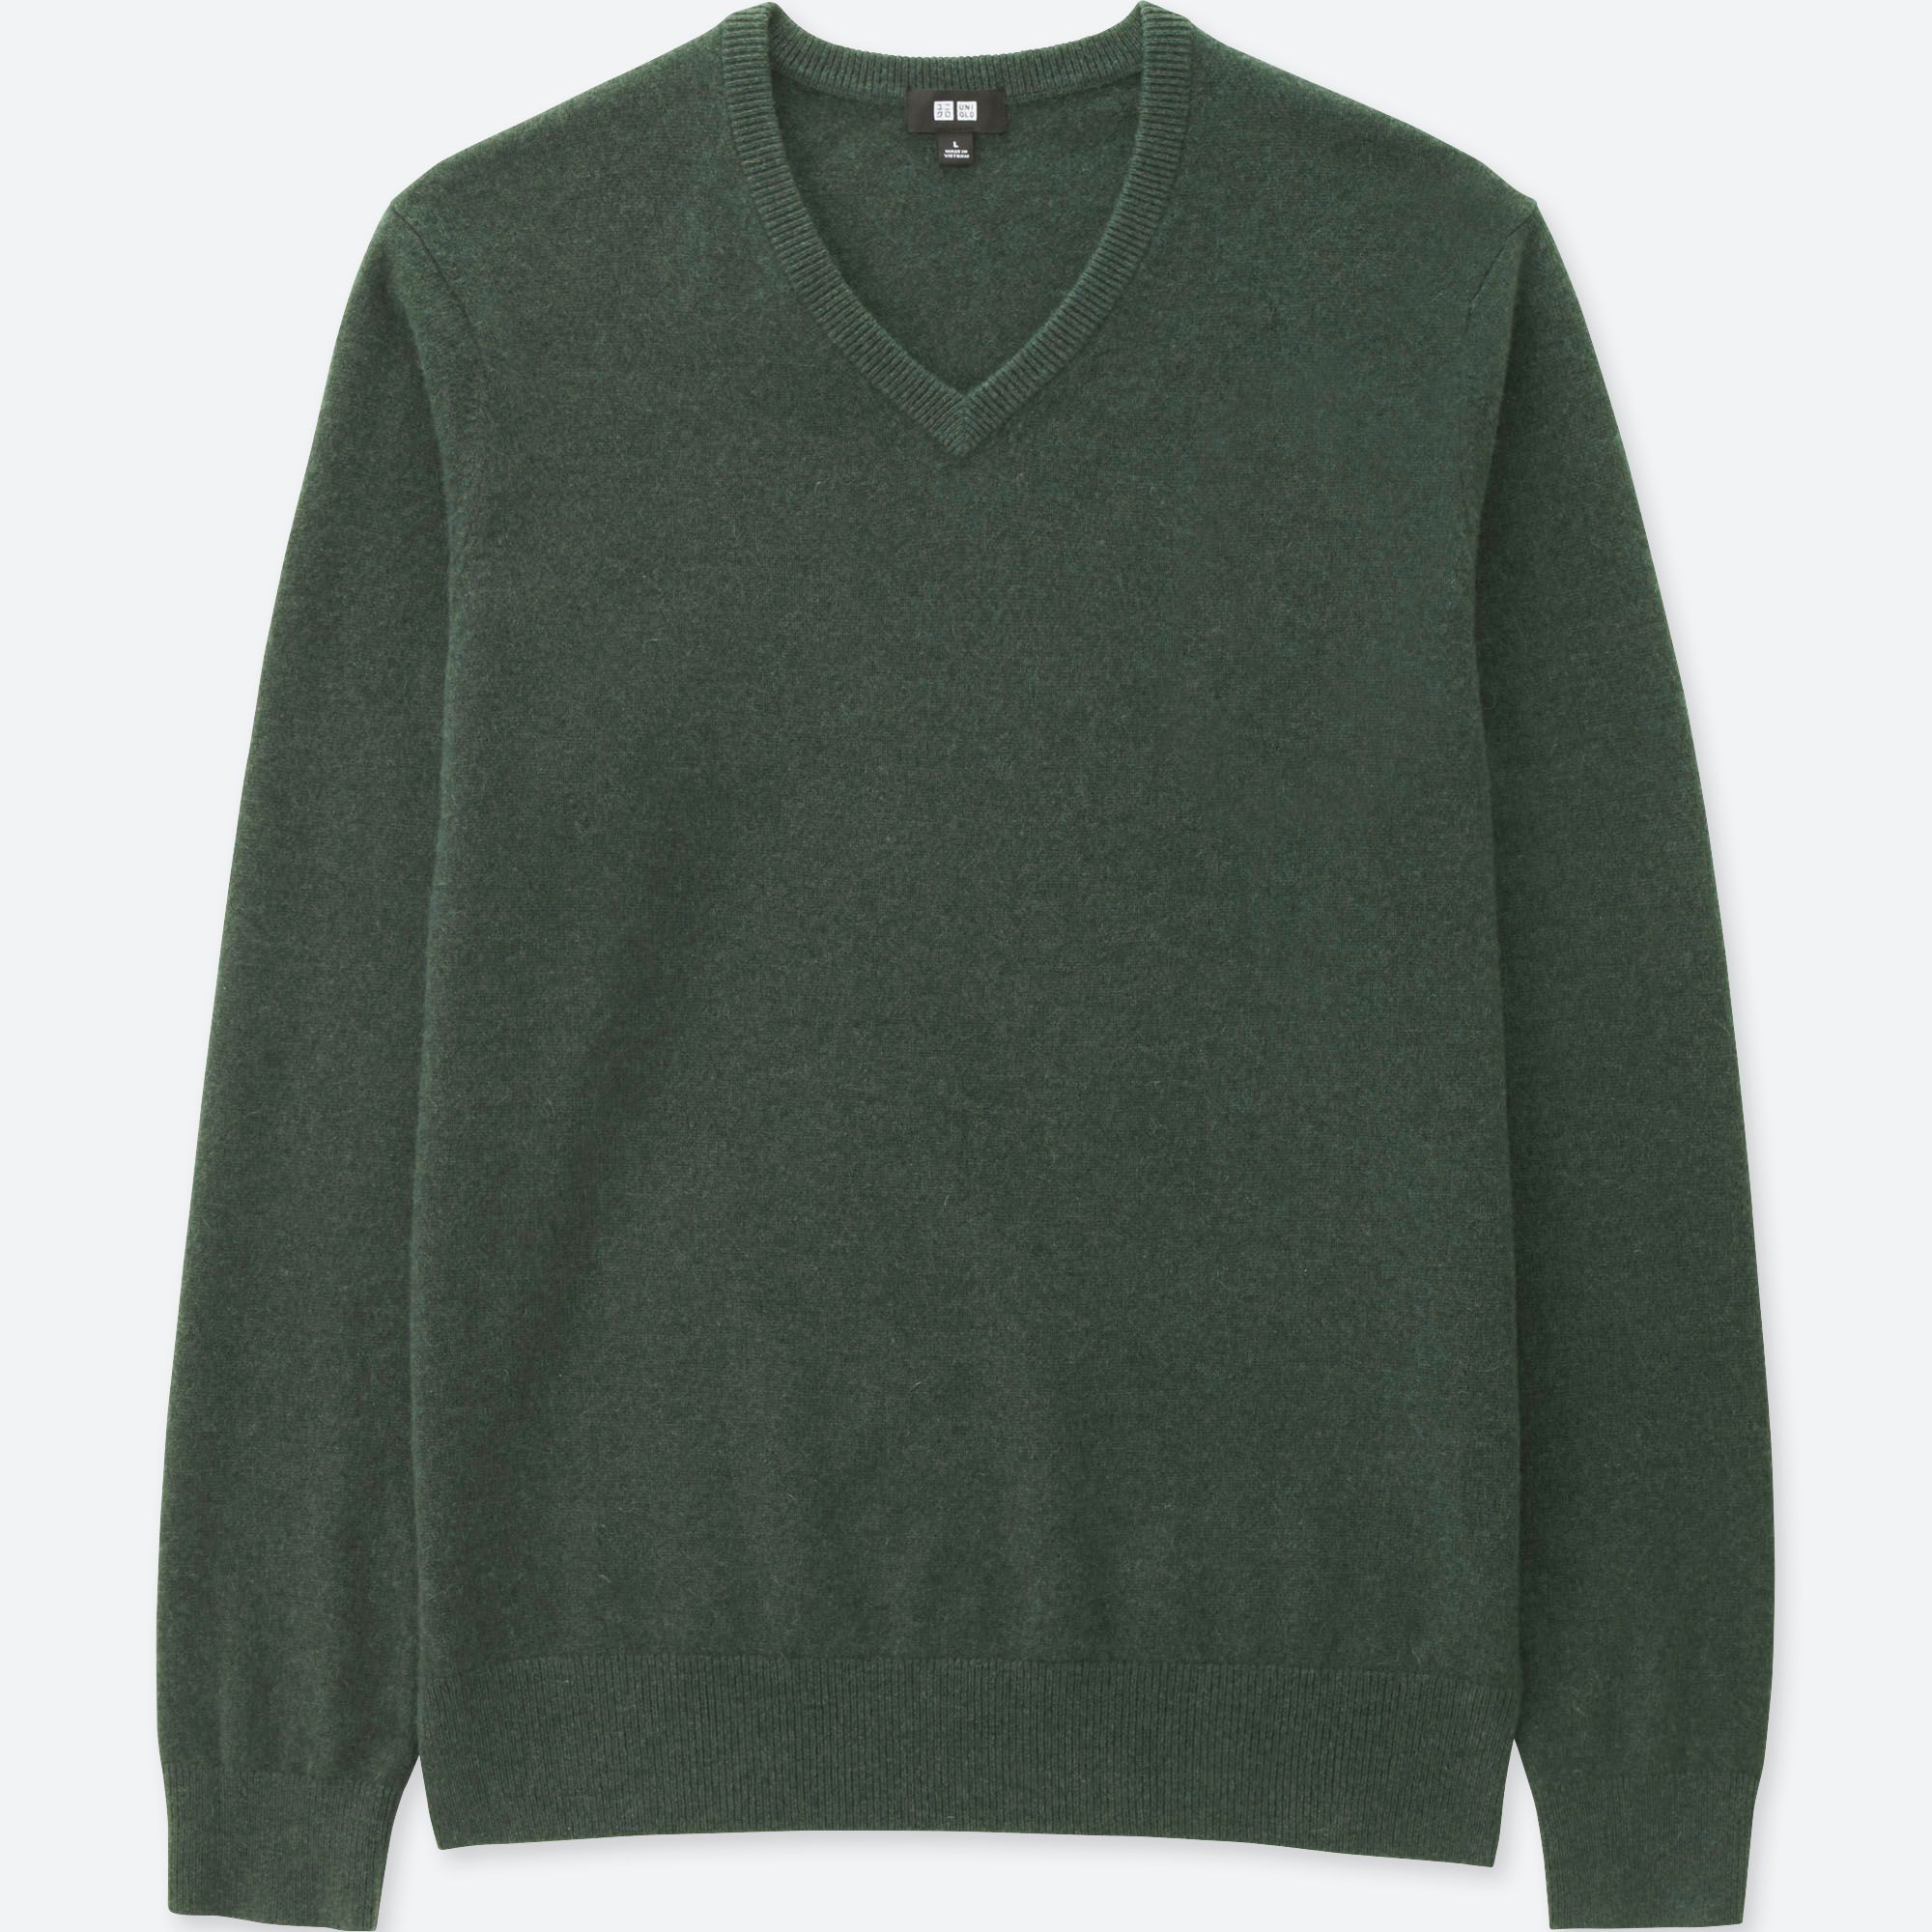 Men's Clothing Offers | Fashion Limited Offers | UNIQLO UK